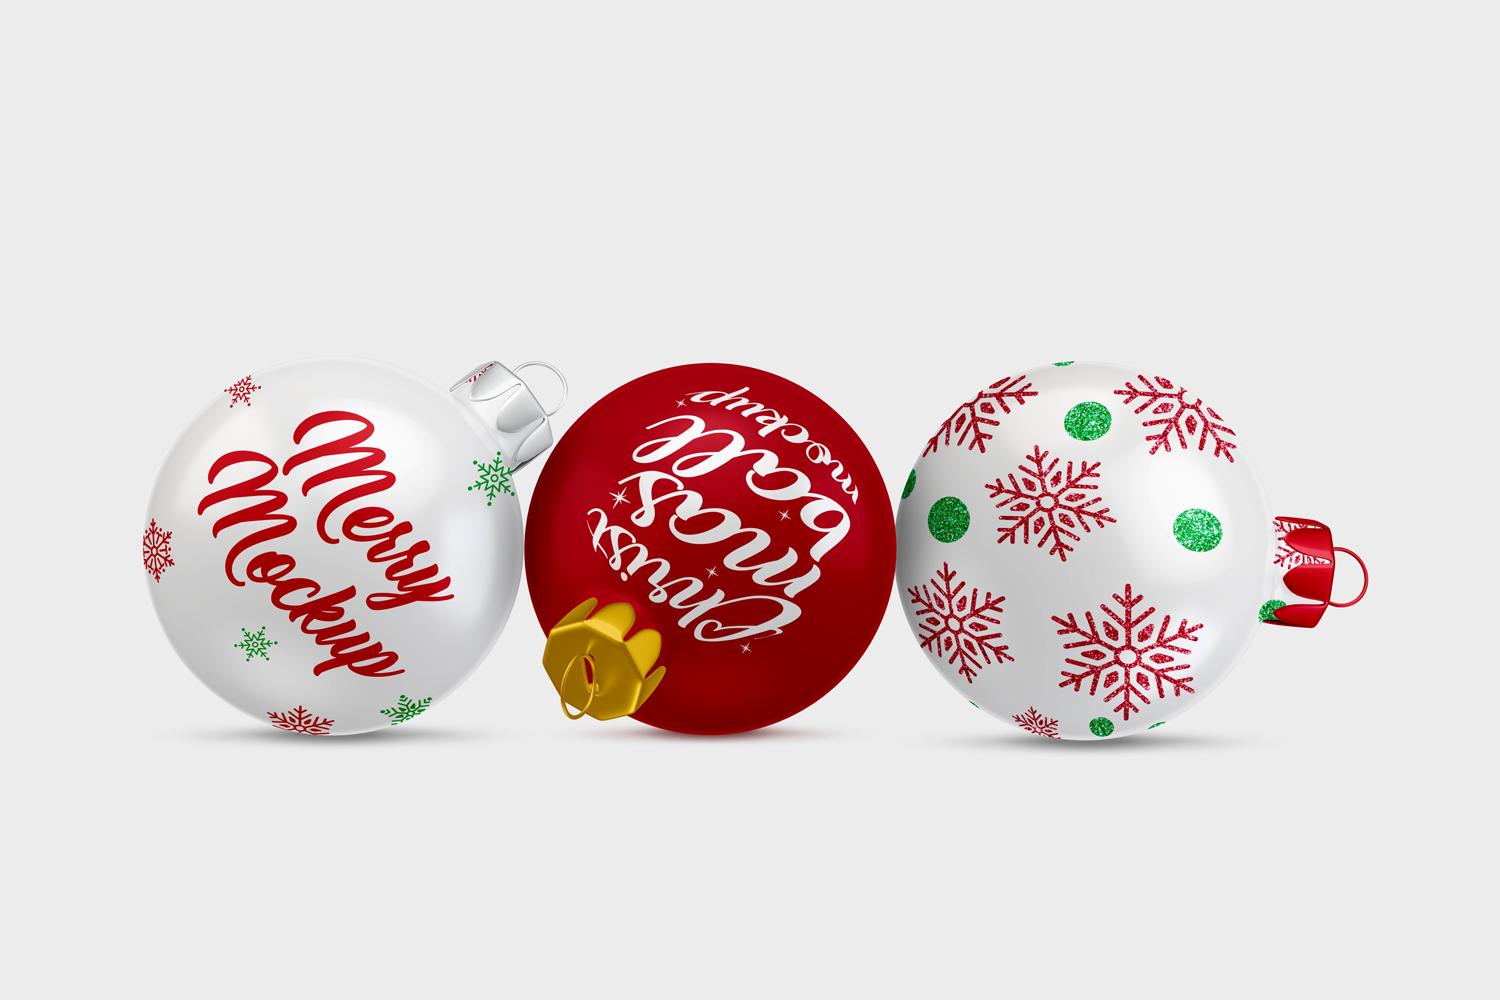 Animated Christmas tree ball mockup with red and gold ornaments